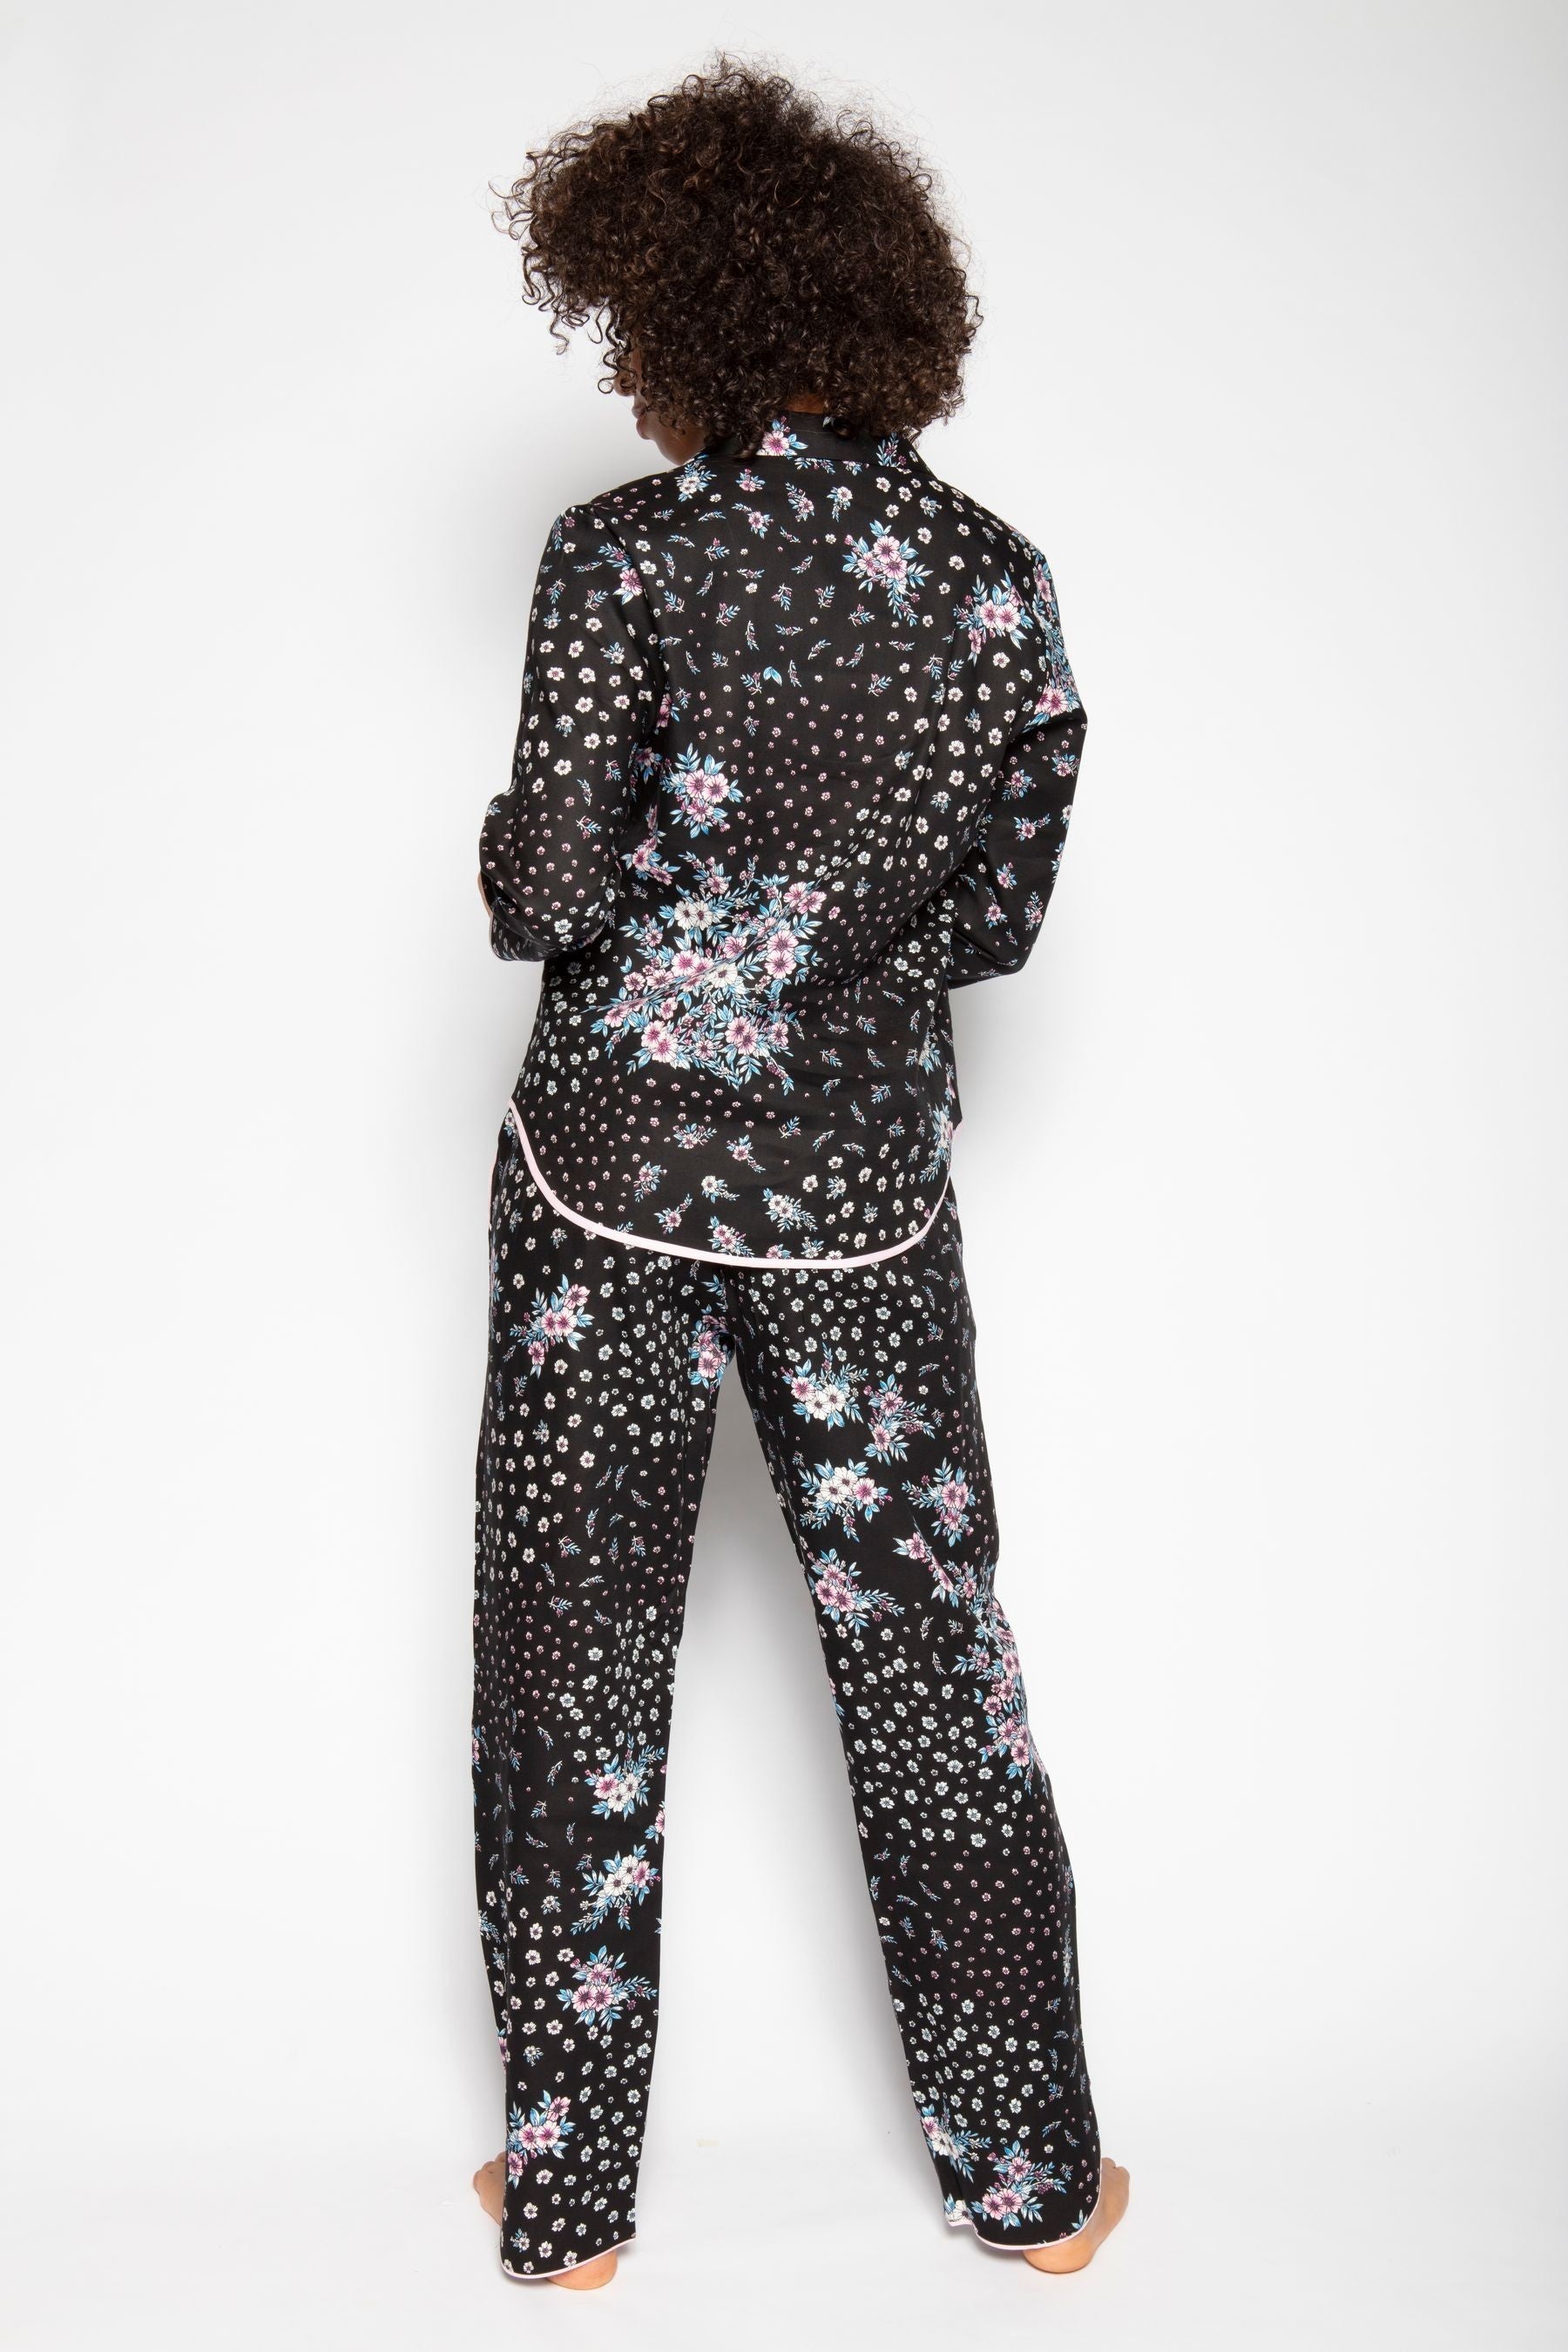 Black Color Digital Abstract Printed loungewear/Nightsuit For Women With Pants.